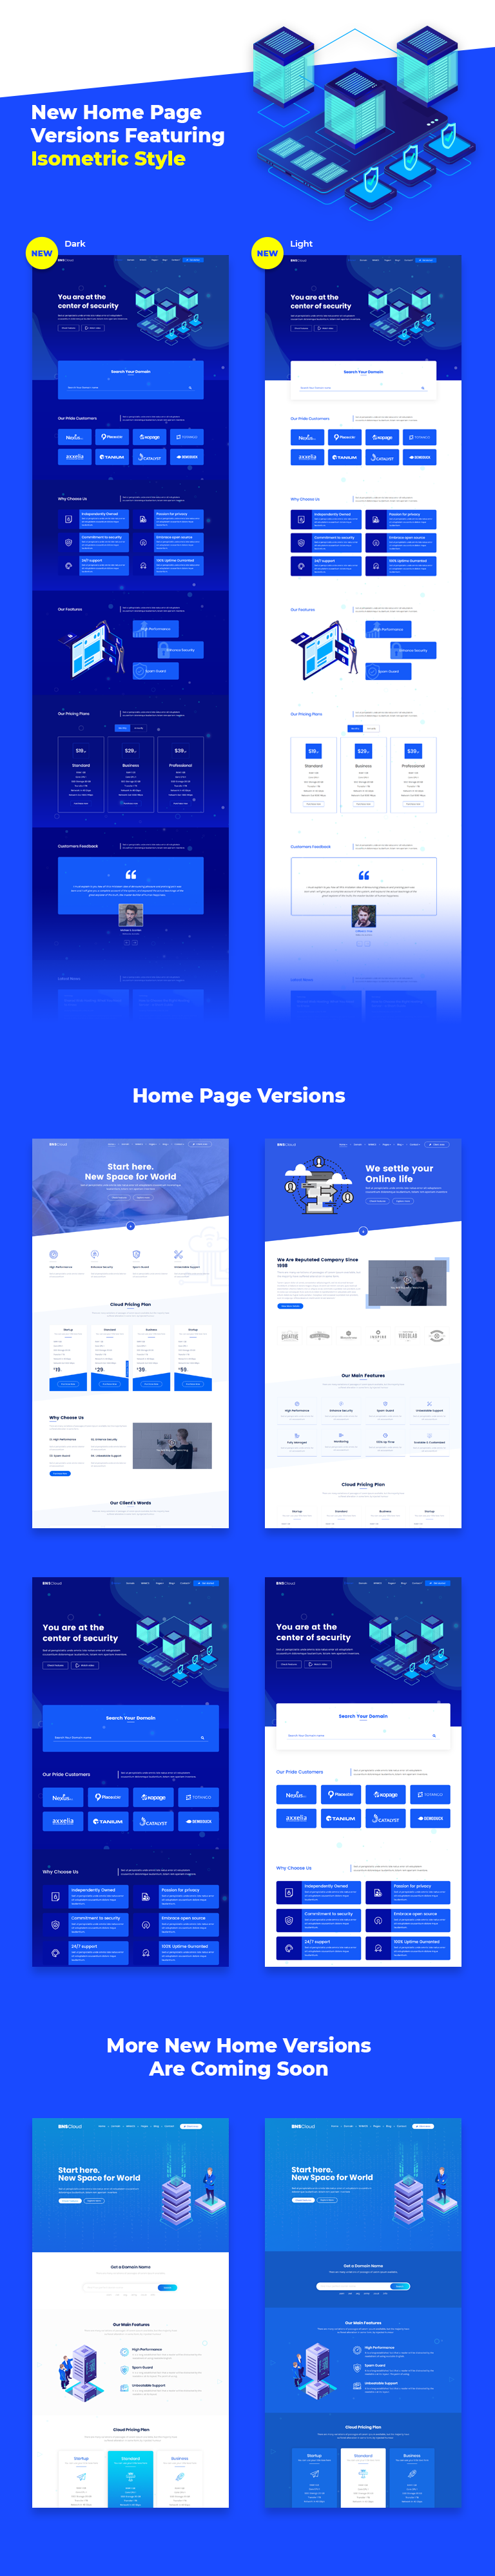 02.new home page - BNSCloud | Multipurpose Hosting with WHMCS Templates